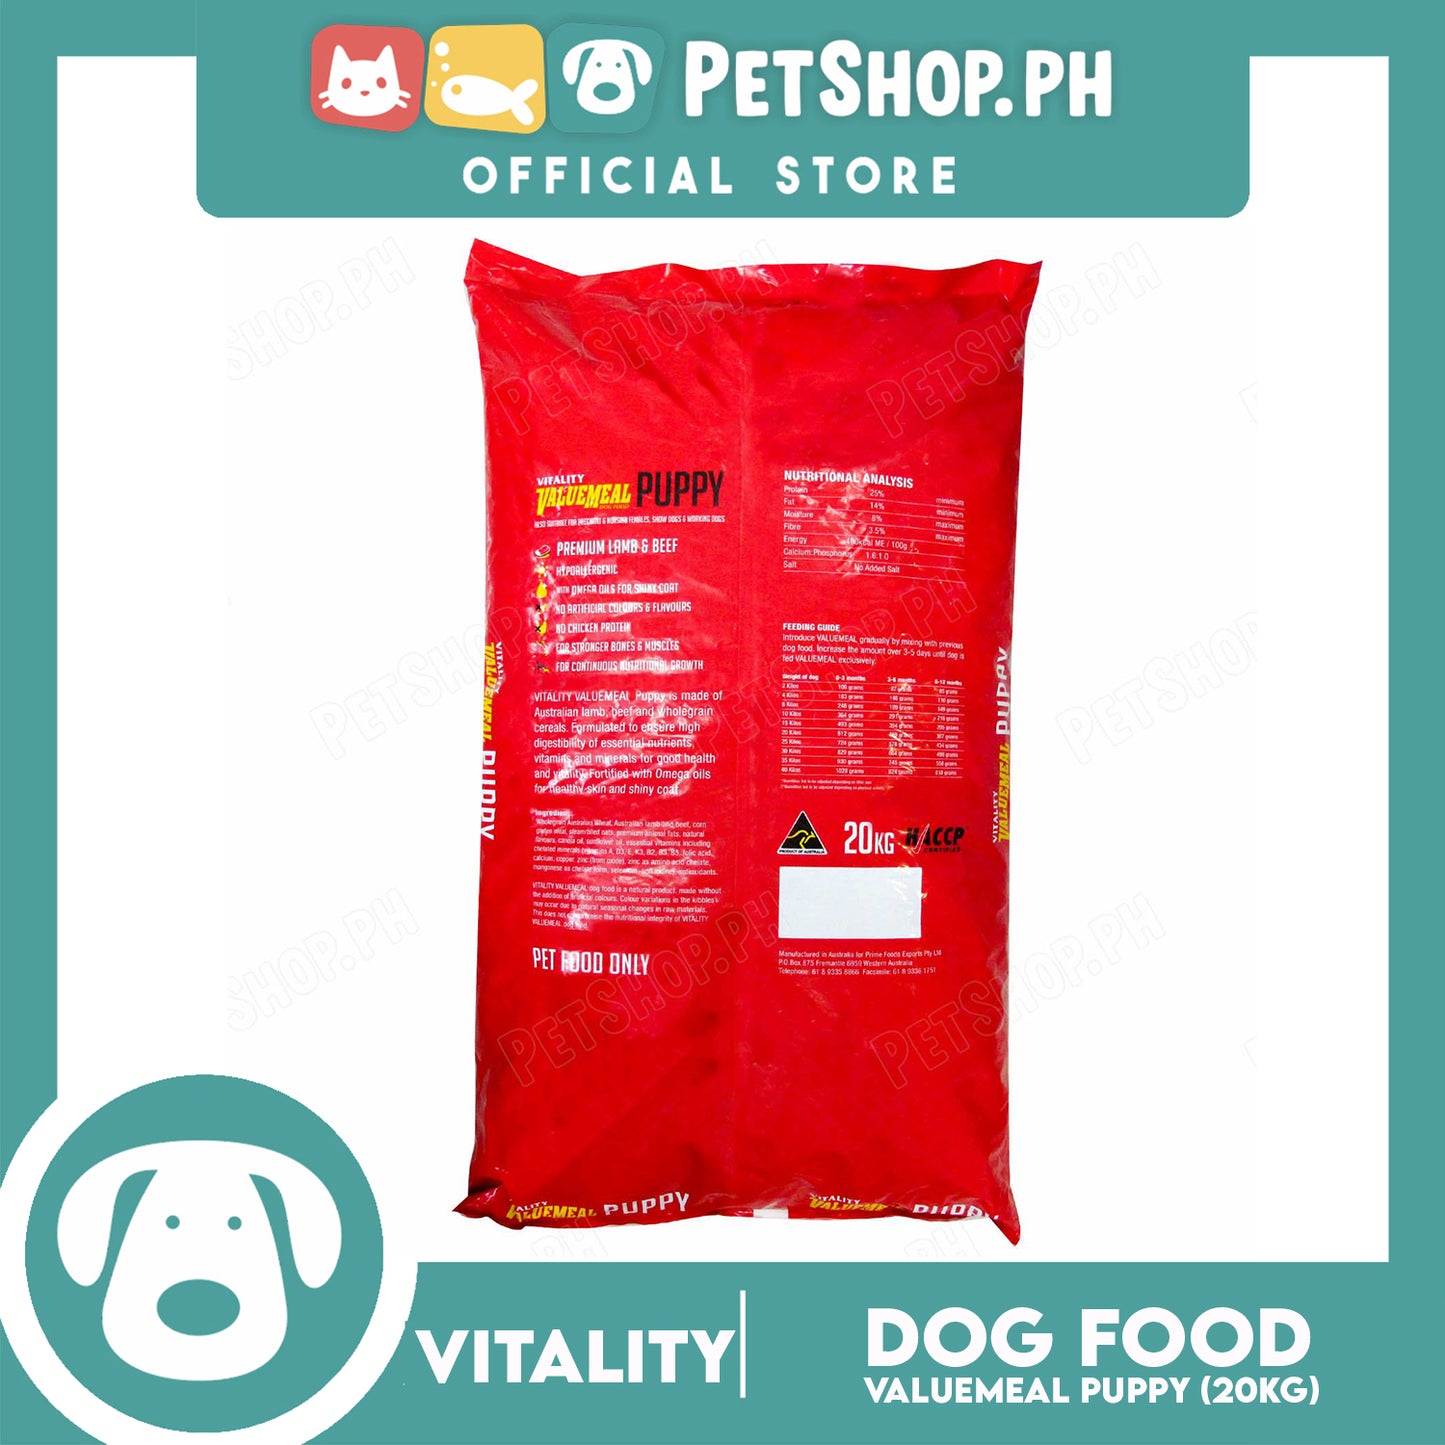 Vitality Valuemeal Puppy Small Bite, Premium Lamb And Beef Flavor 20kgs Puppy Food, Dry Dog Food